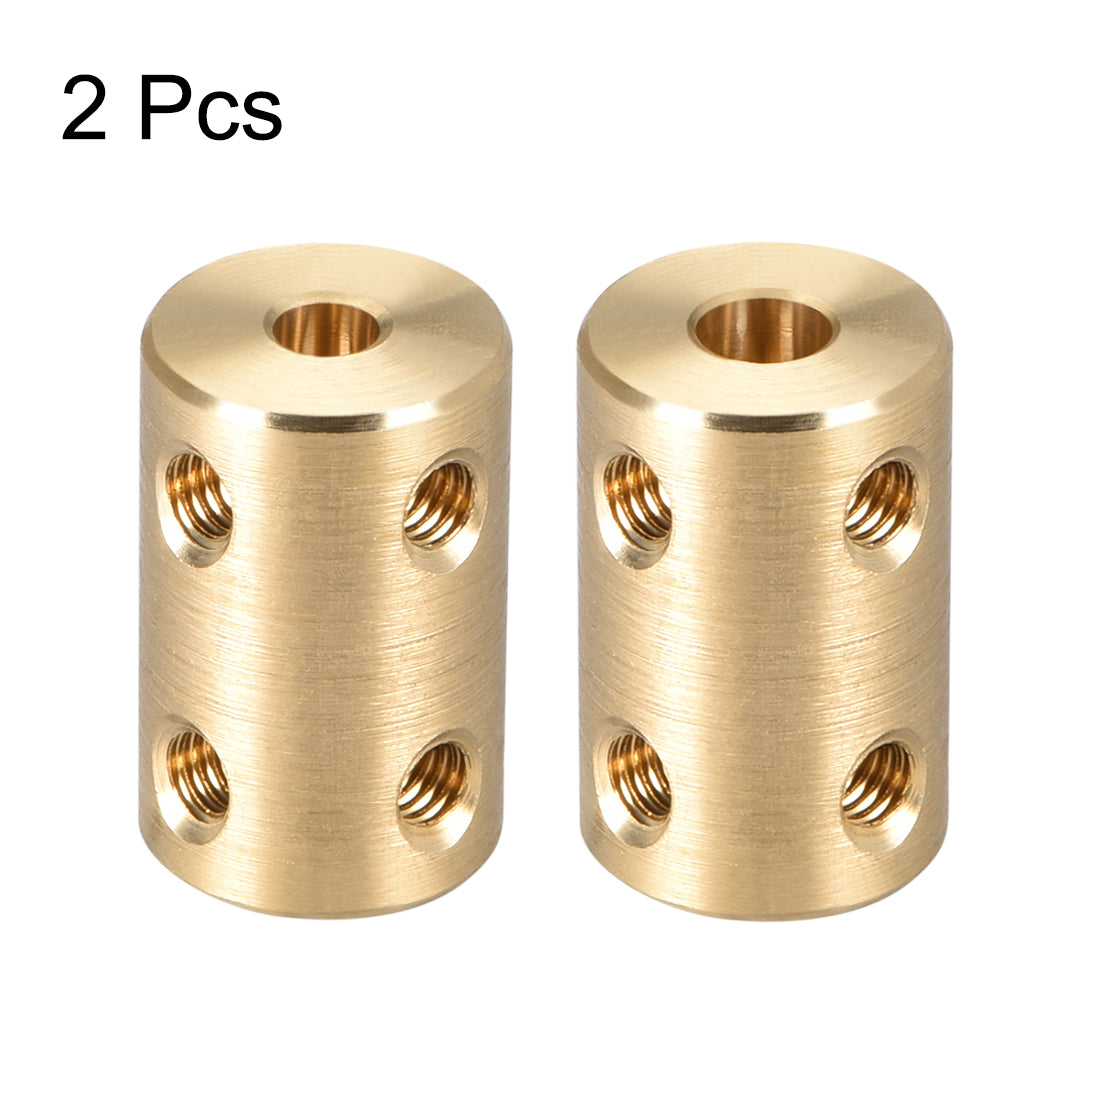 uxcell Uxcell Shaft Coupling 4mm to 5mm Bore L22xD14 Robot Motor Wheel Rigid Coupler Connector Gold Tone 2PCS